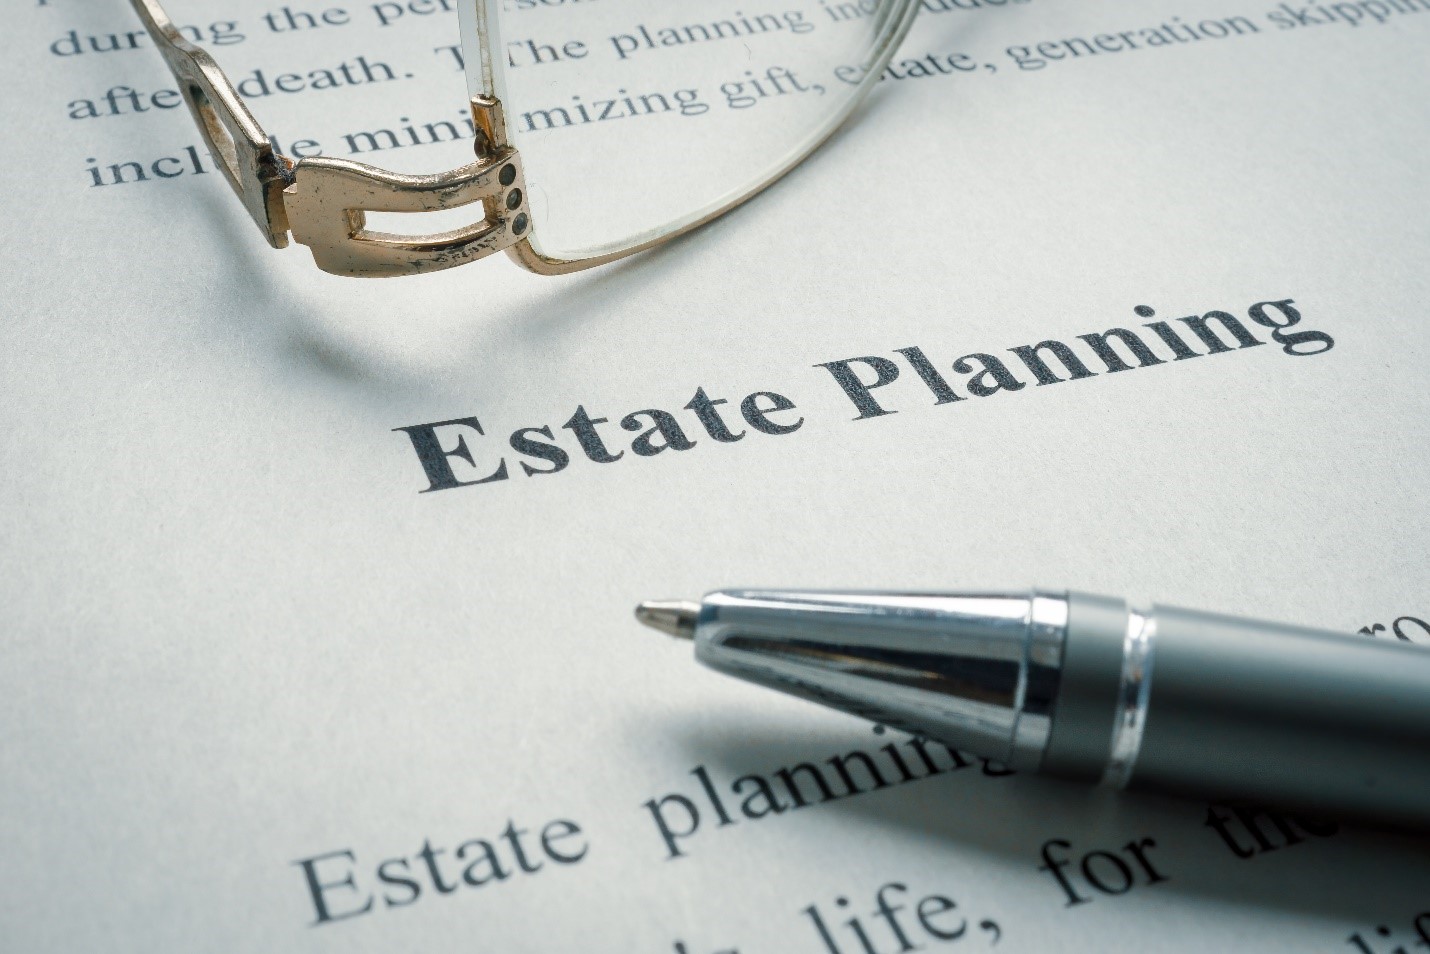 Tips For Effective Estate Planning From Prose Legal Services